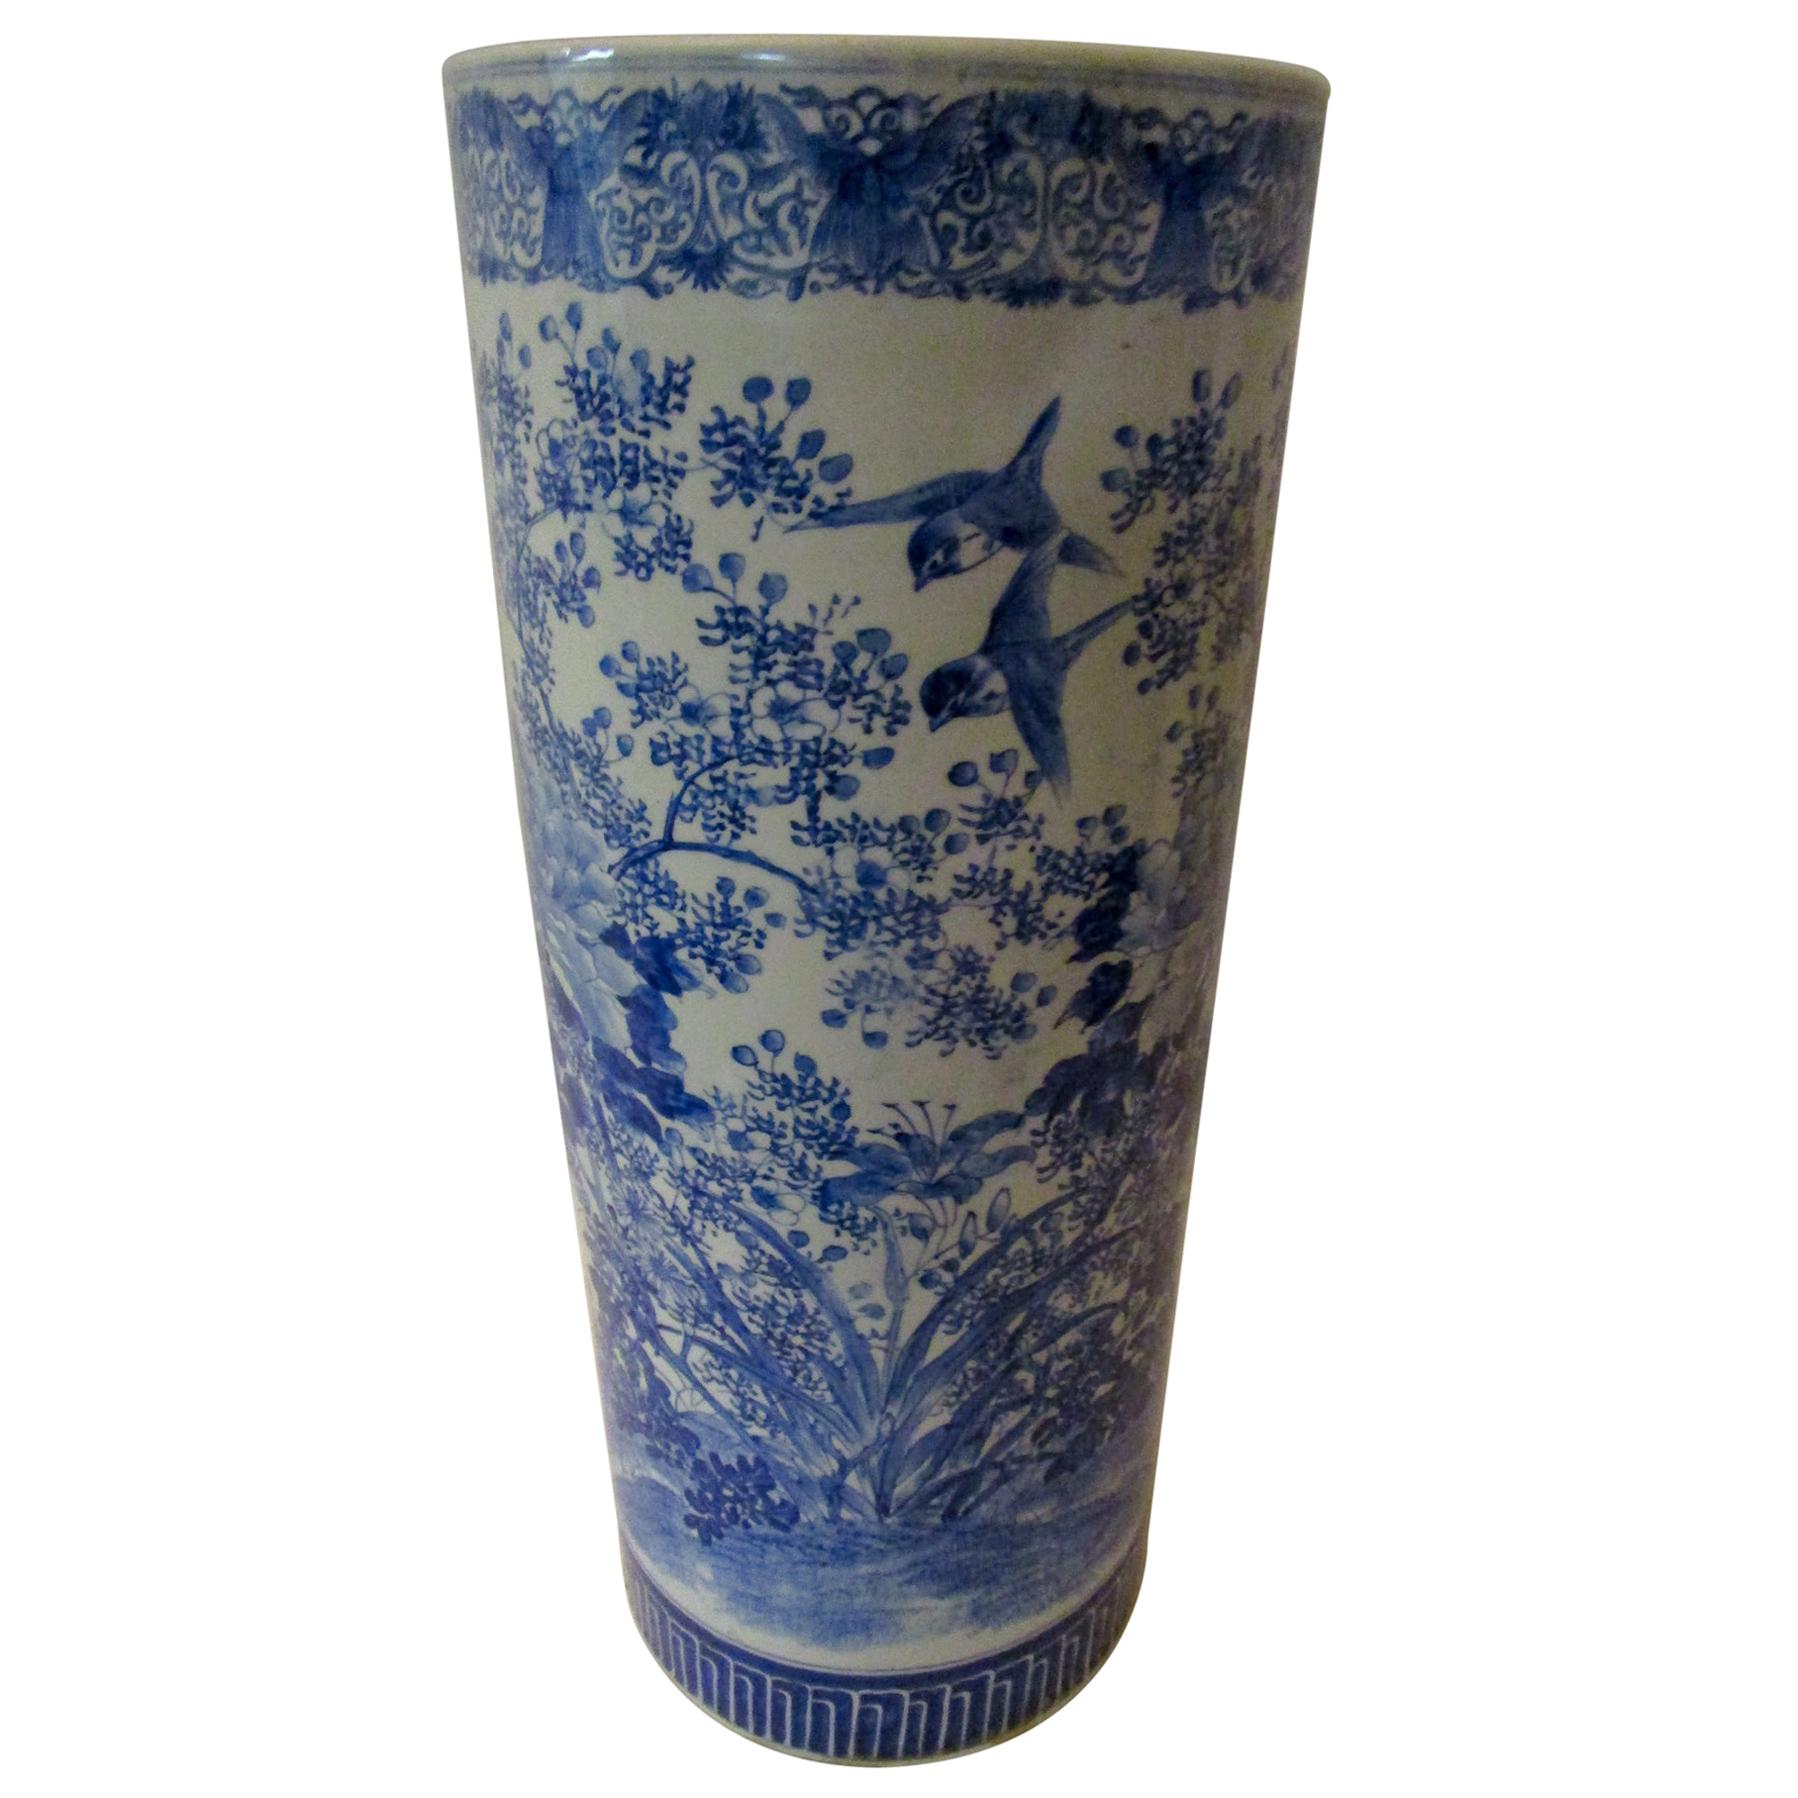 Chinese Export Blue and White Porcelain Umbrella Stand Vase